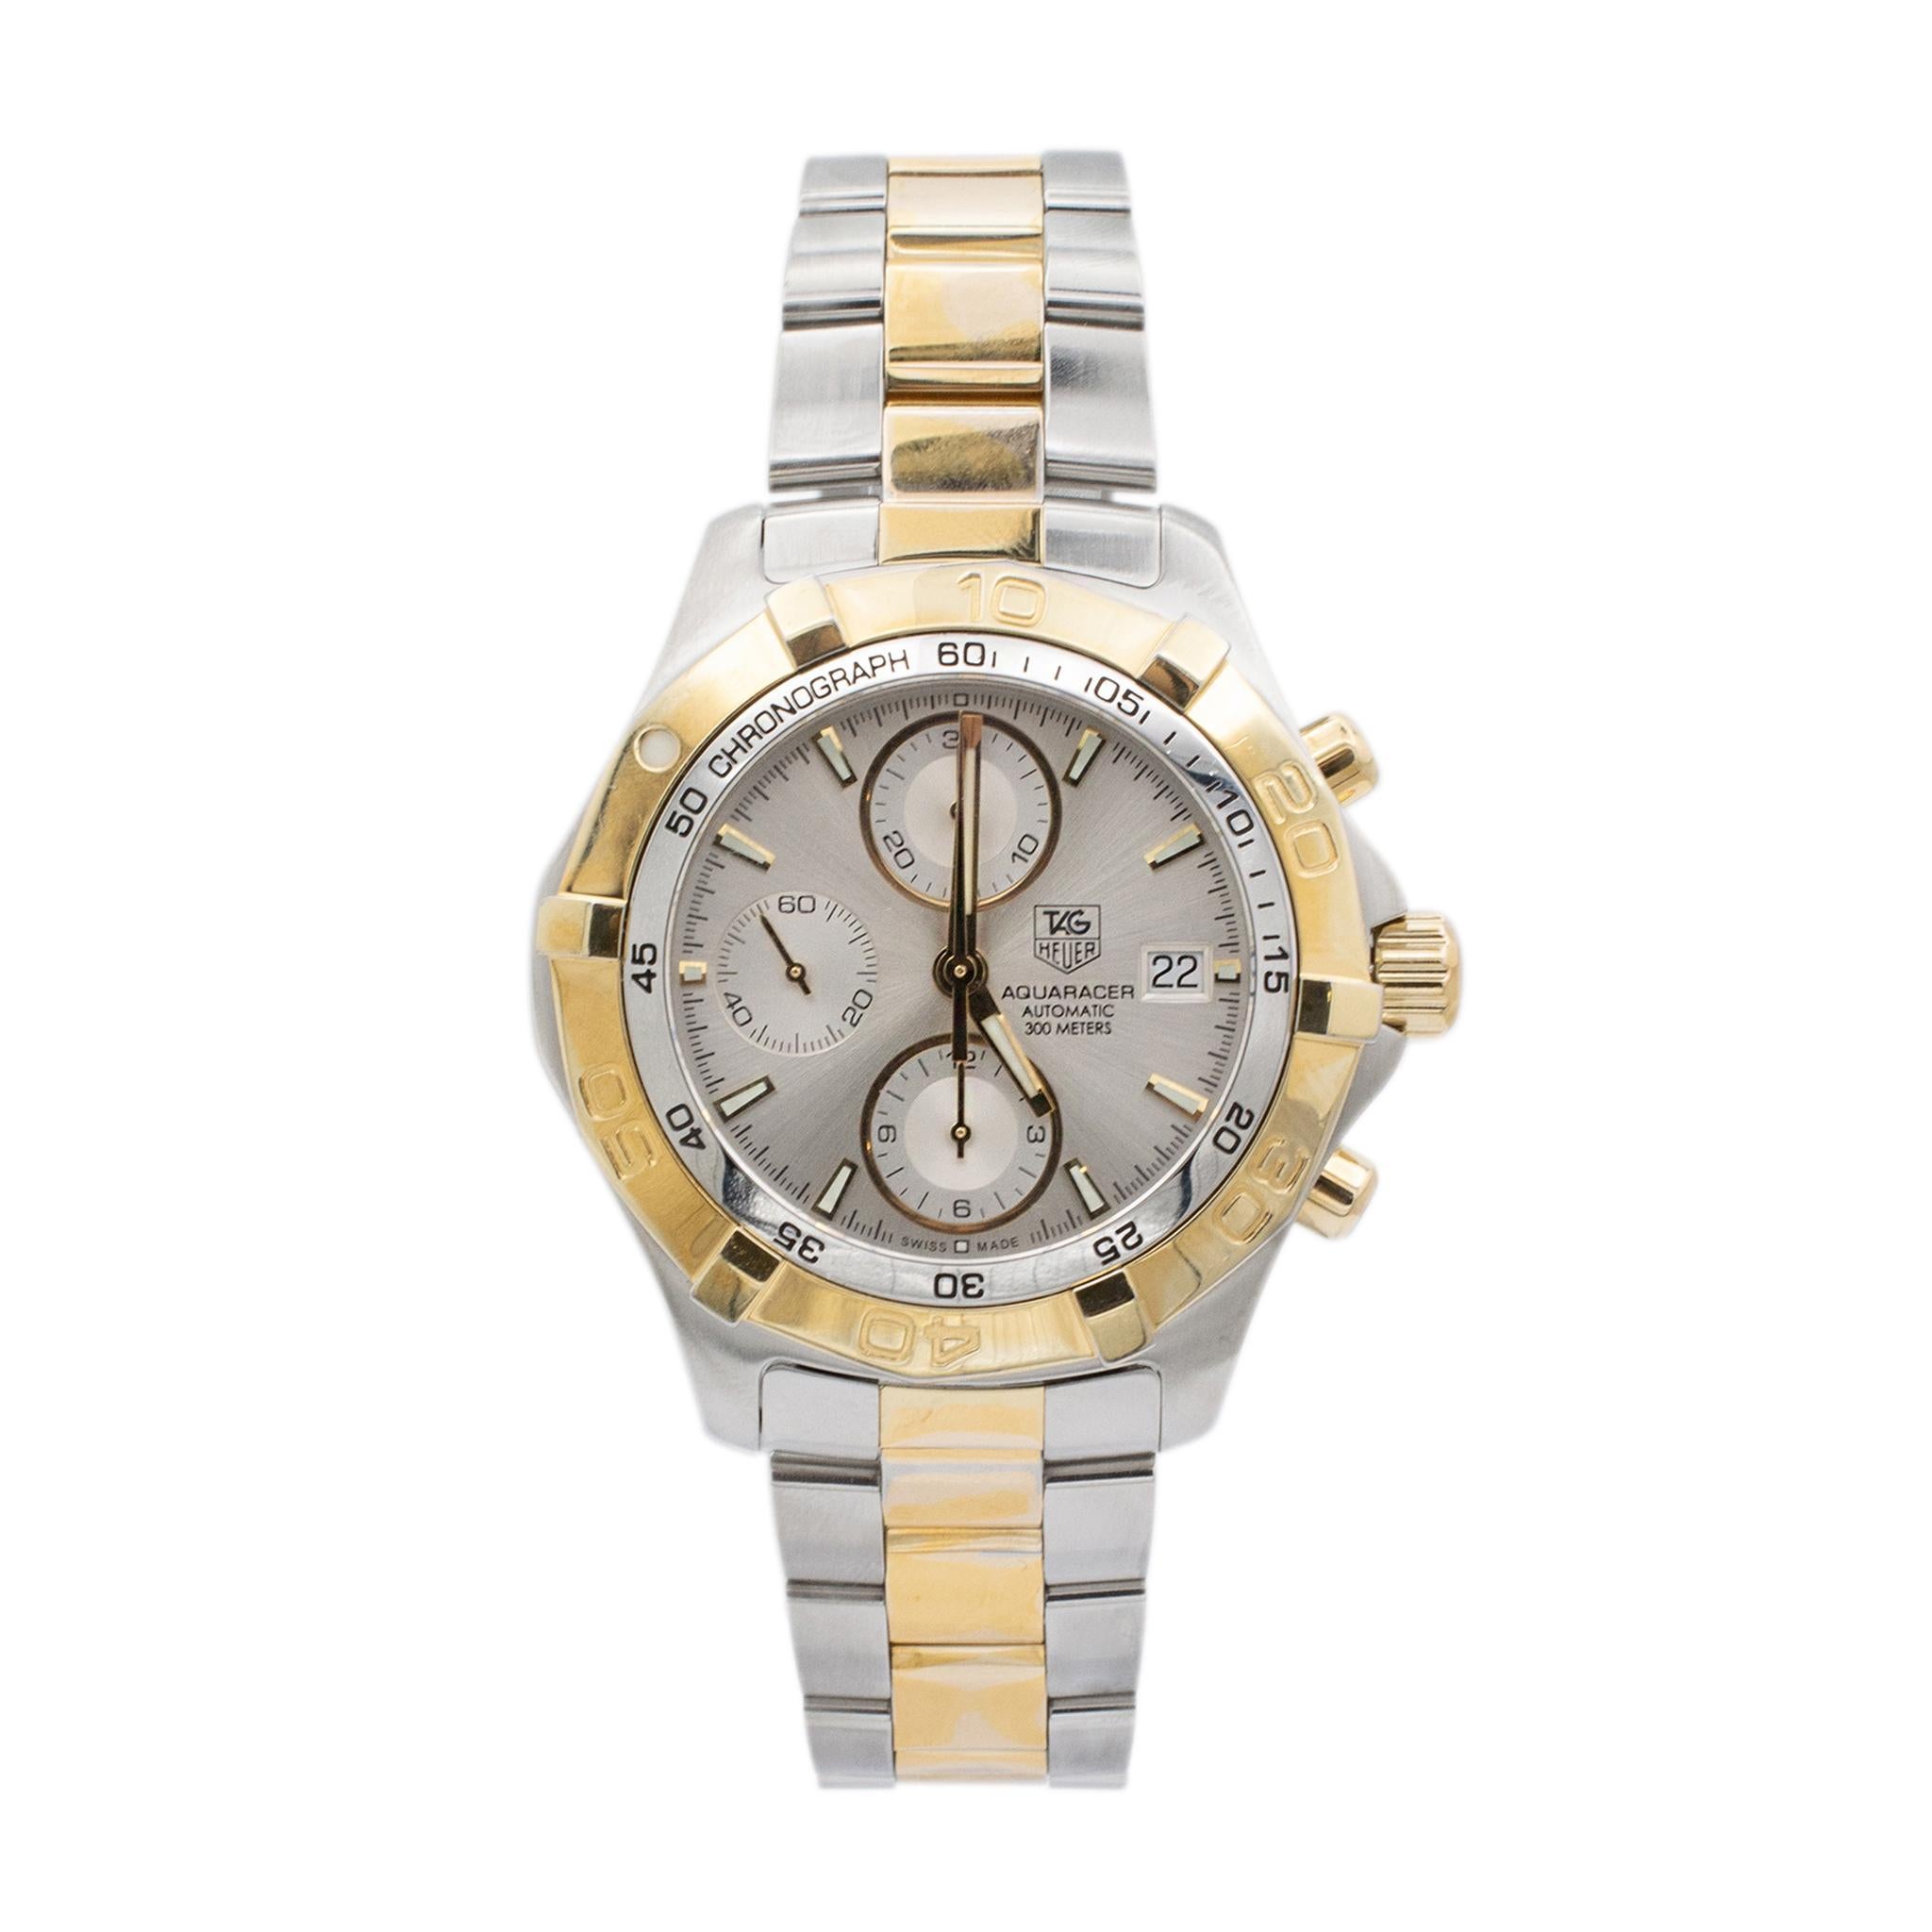 Brand: TAG Heuer

Gender: Men

Weight: 180.76 grams

Band Length: 8.00 inches

The Aquaracer Date CAF2120 41MM Chronograph Two-Tone Stainless Steel watch weighs a total of 180.76 grams. The 